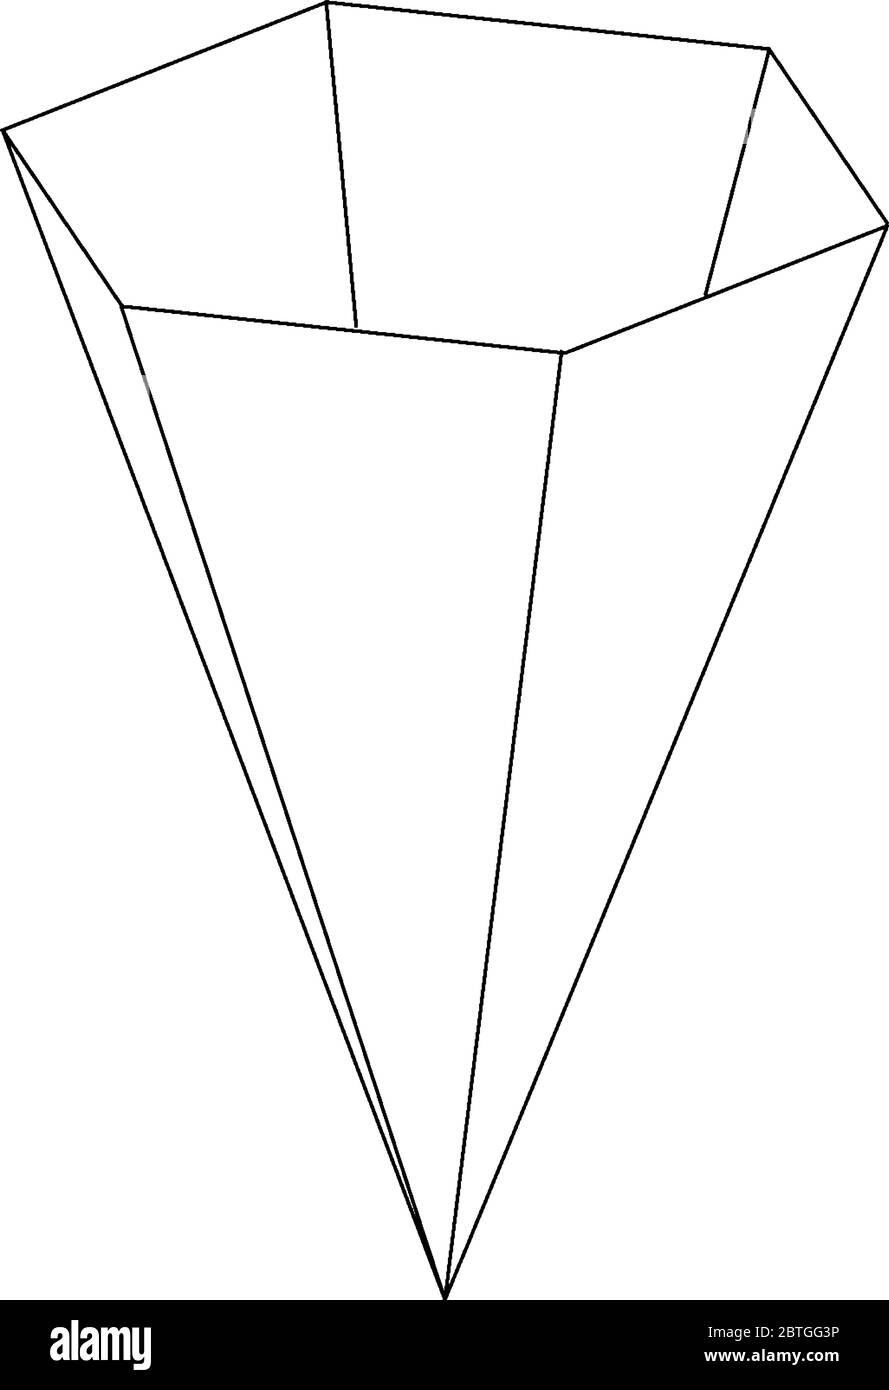 Geometric construction of a hollow right hexagonal pyramid. The base is a hexagon and the faces are isosceles triangles, vintage line drawing or engra Stock Vector